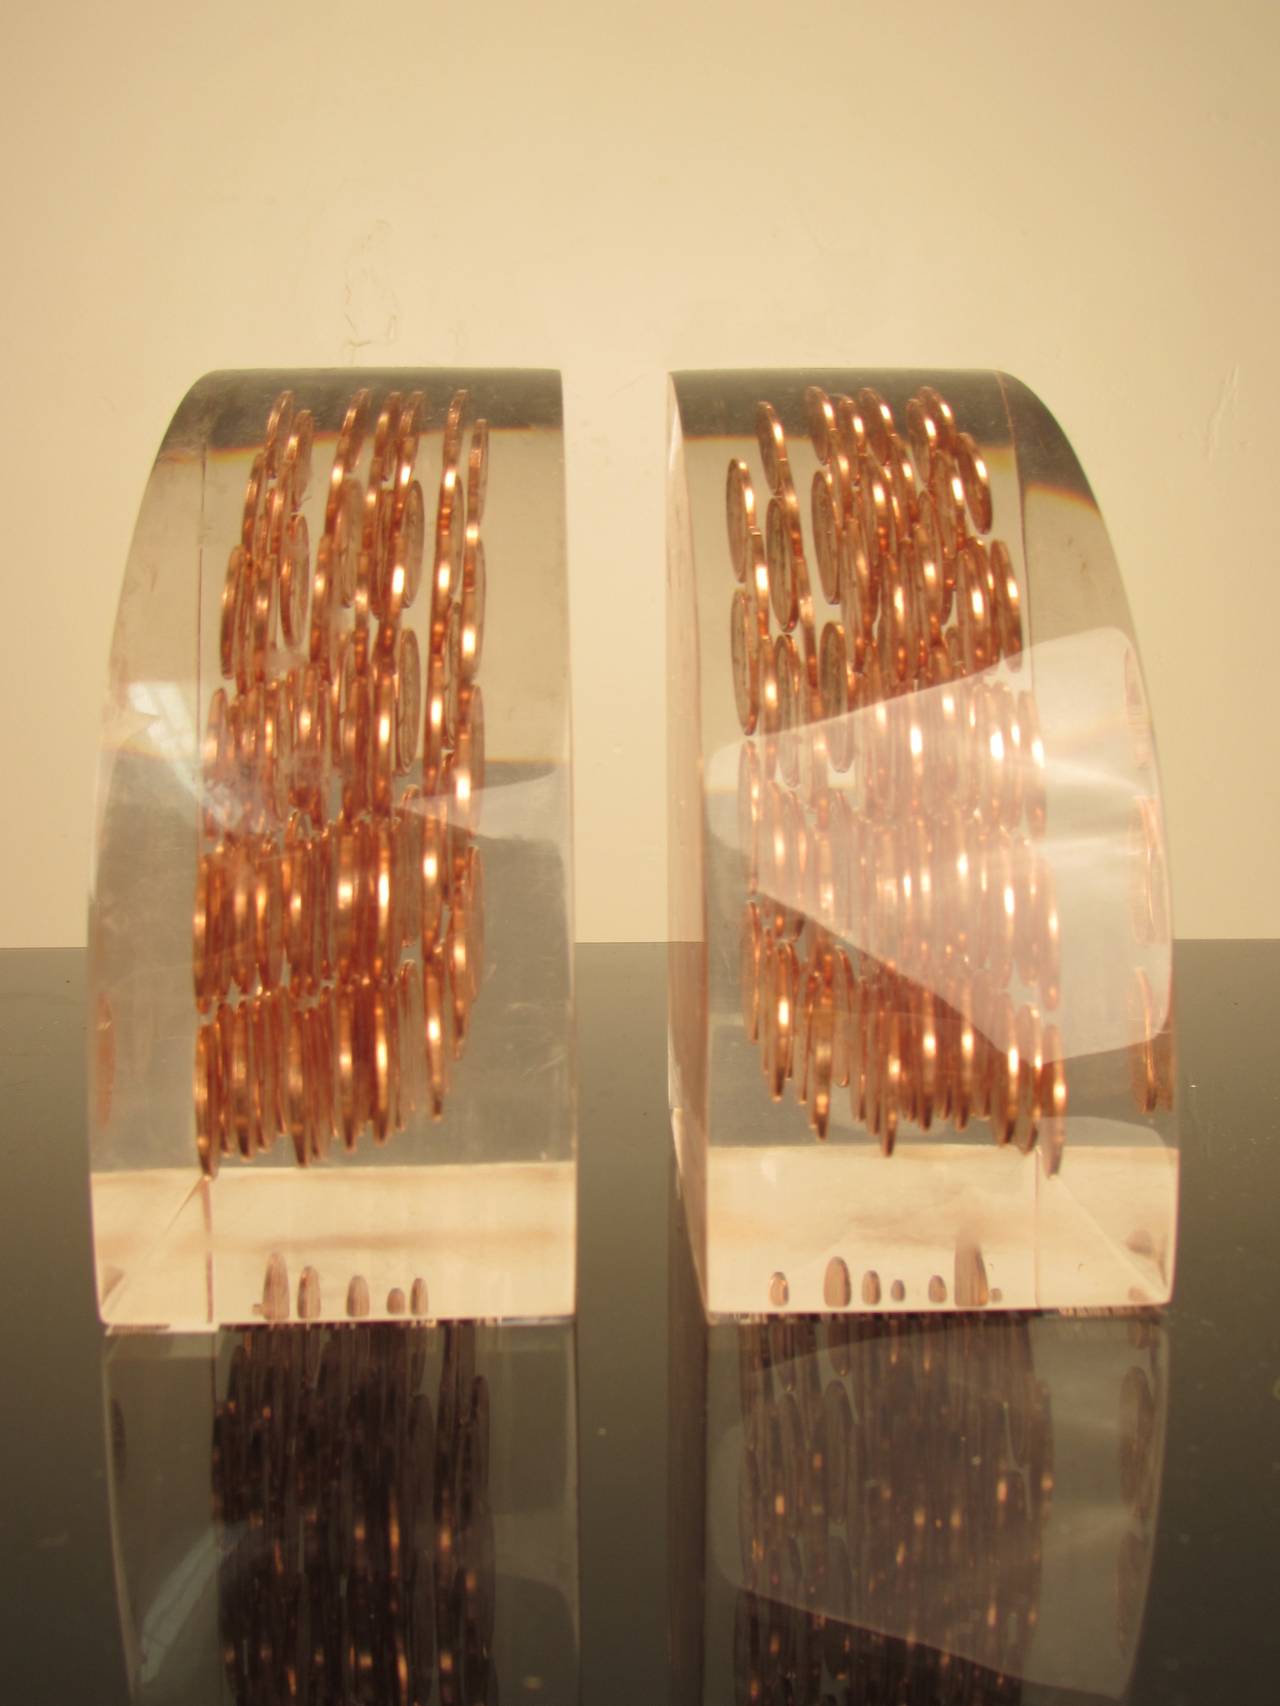 Acrylic Gleaming Lucite Demi-lune Bookends with Suspended Pennies